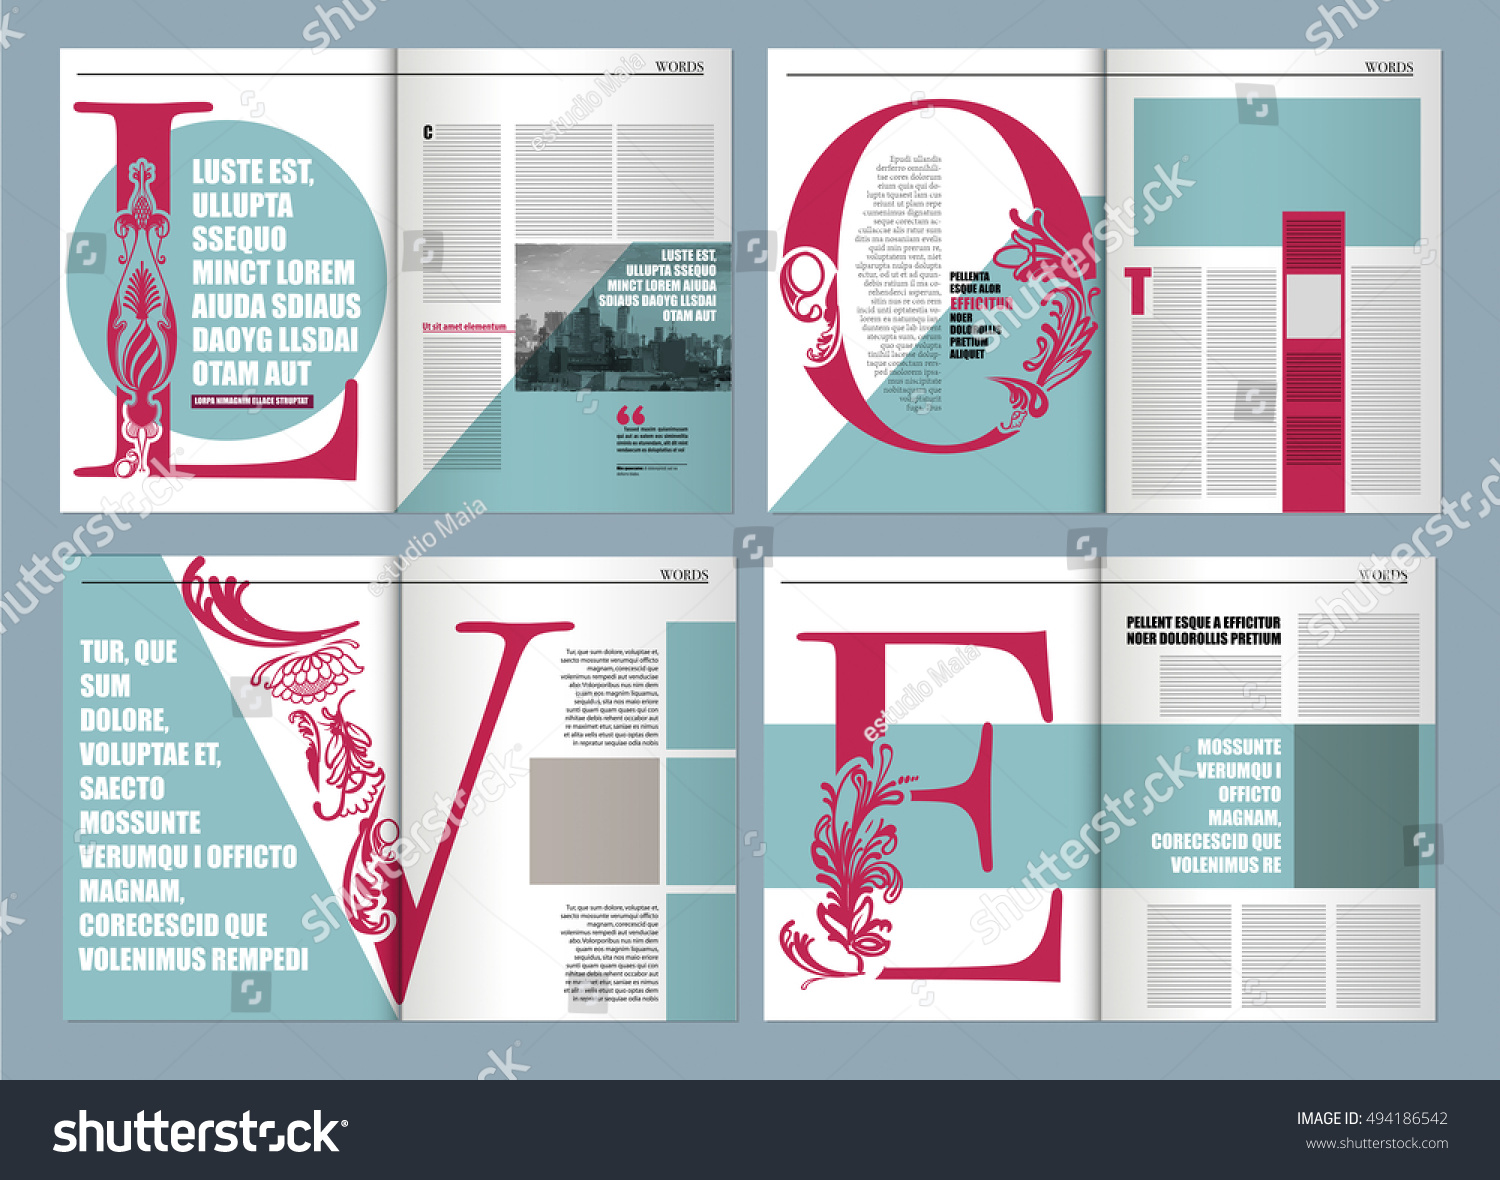 Magazine Layout Template For Word from image.shutterstock.com